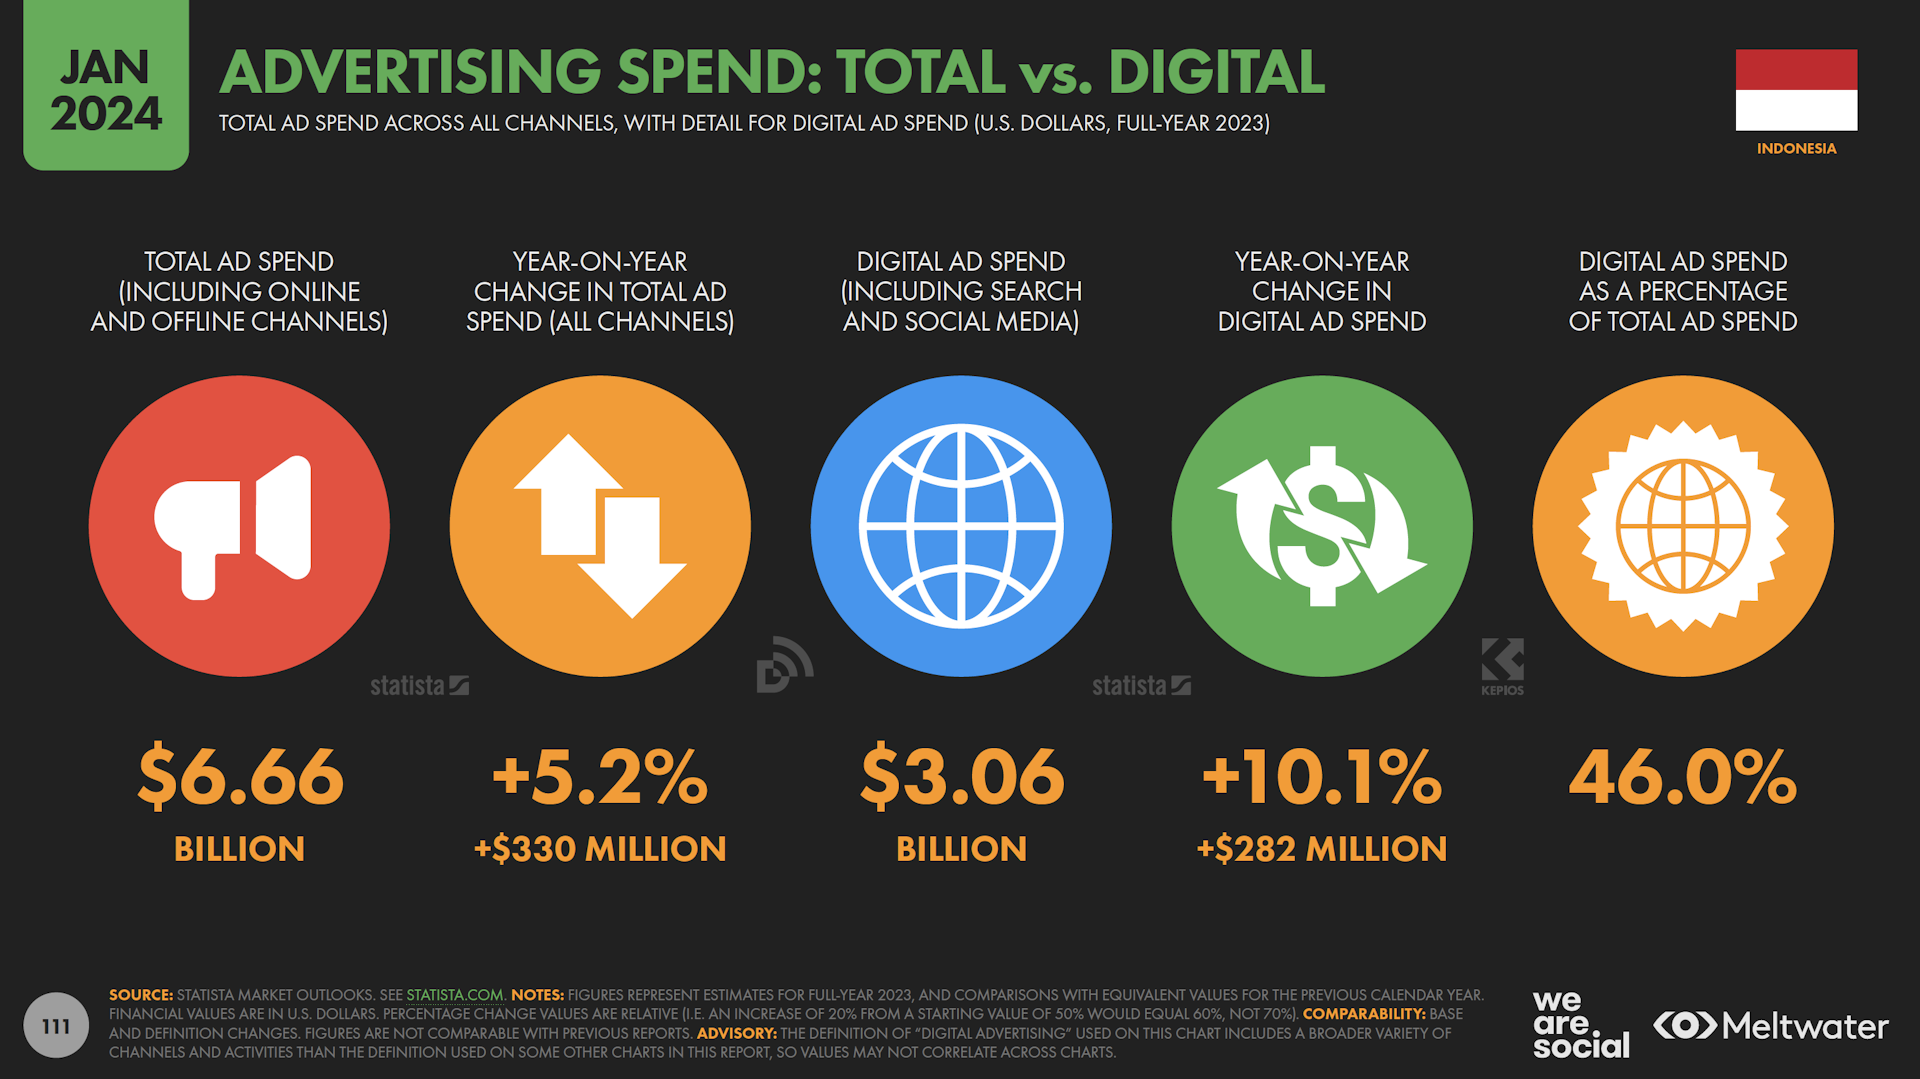 Total advertising spend across all channels and digital based on Global Digital Report 2024 for Indonesia